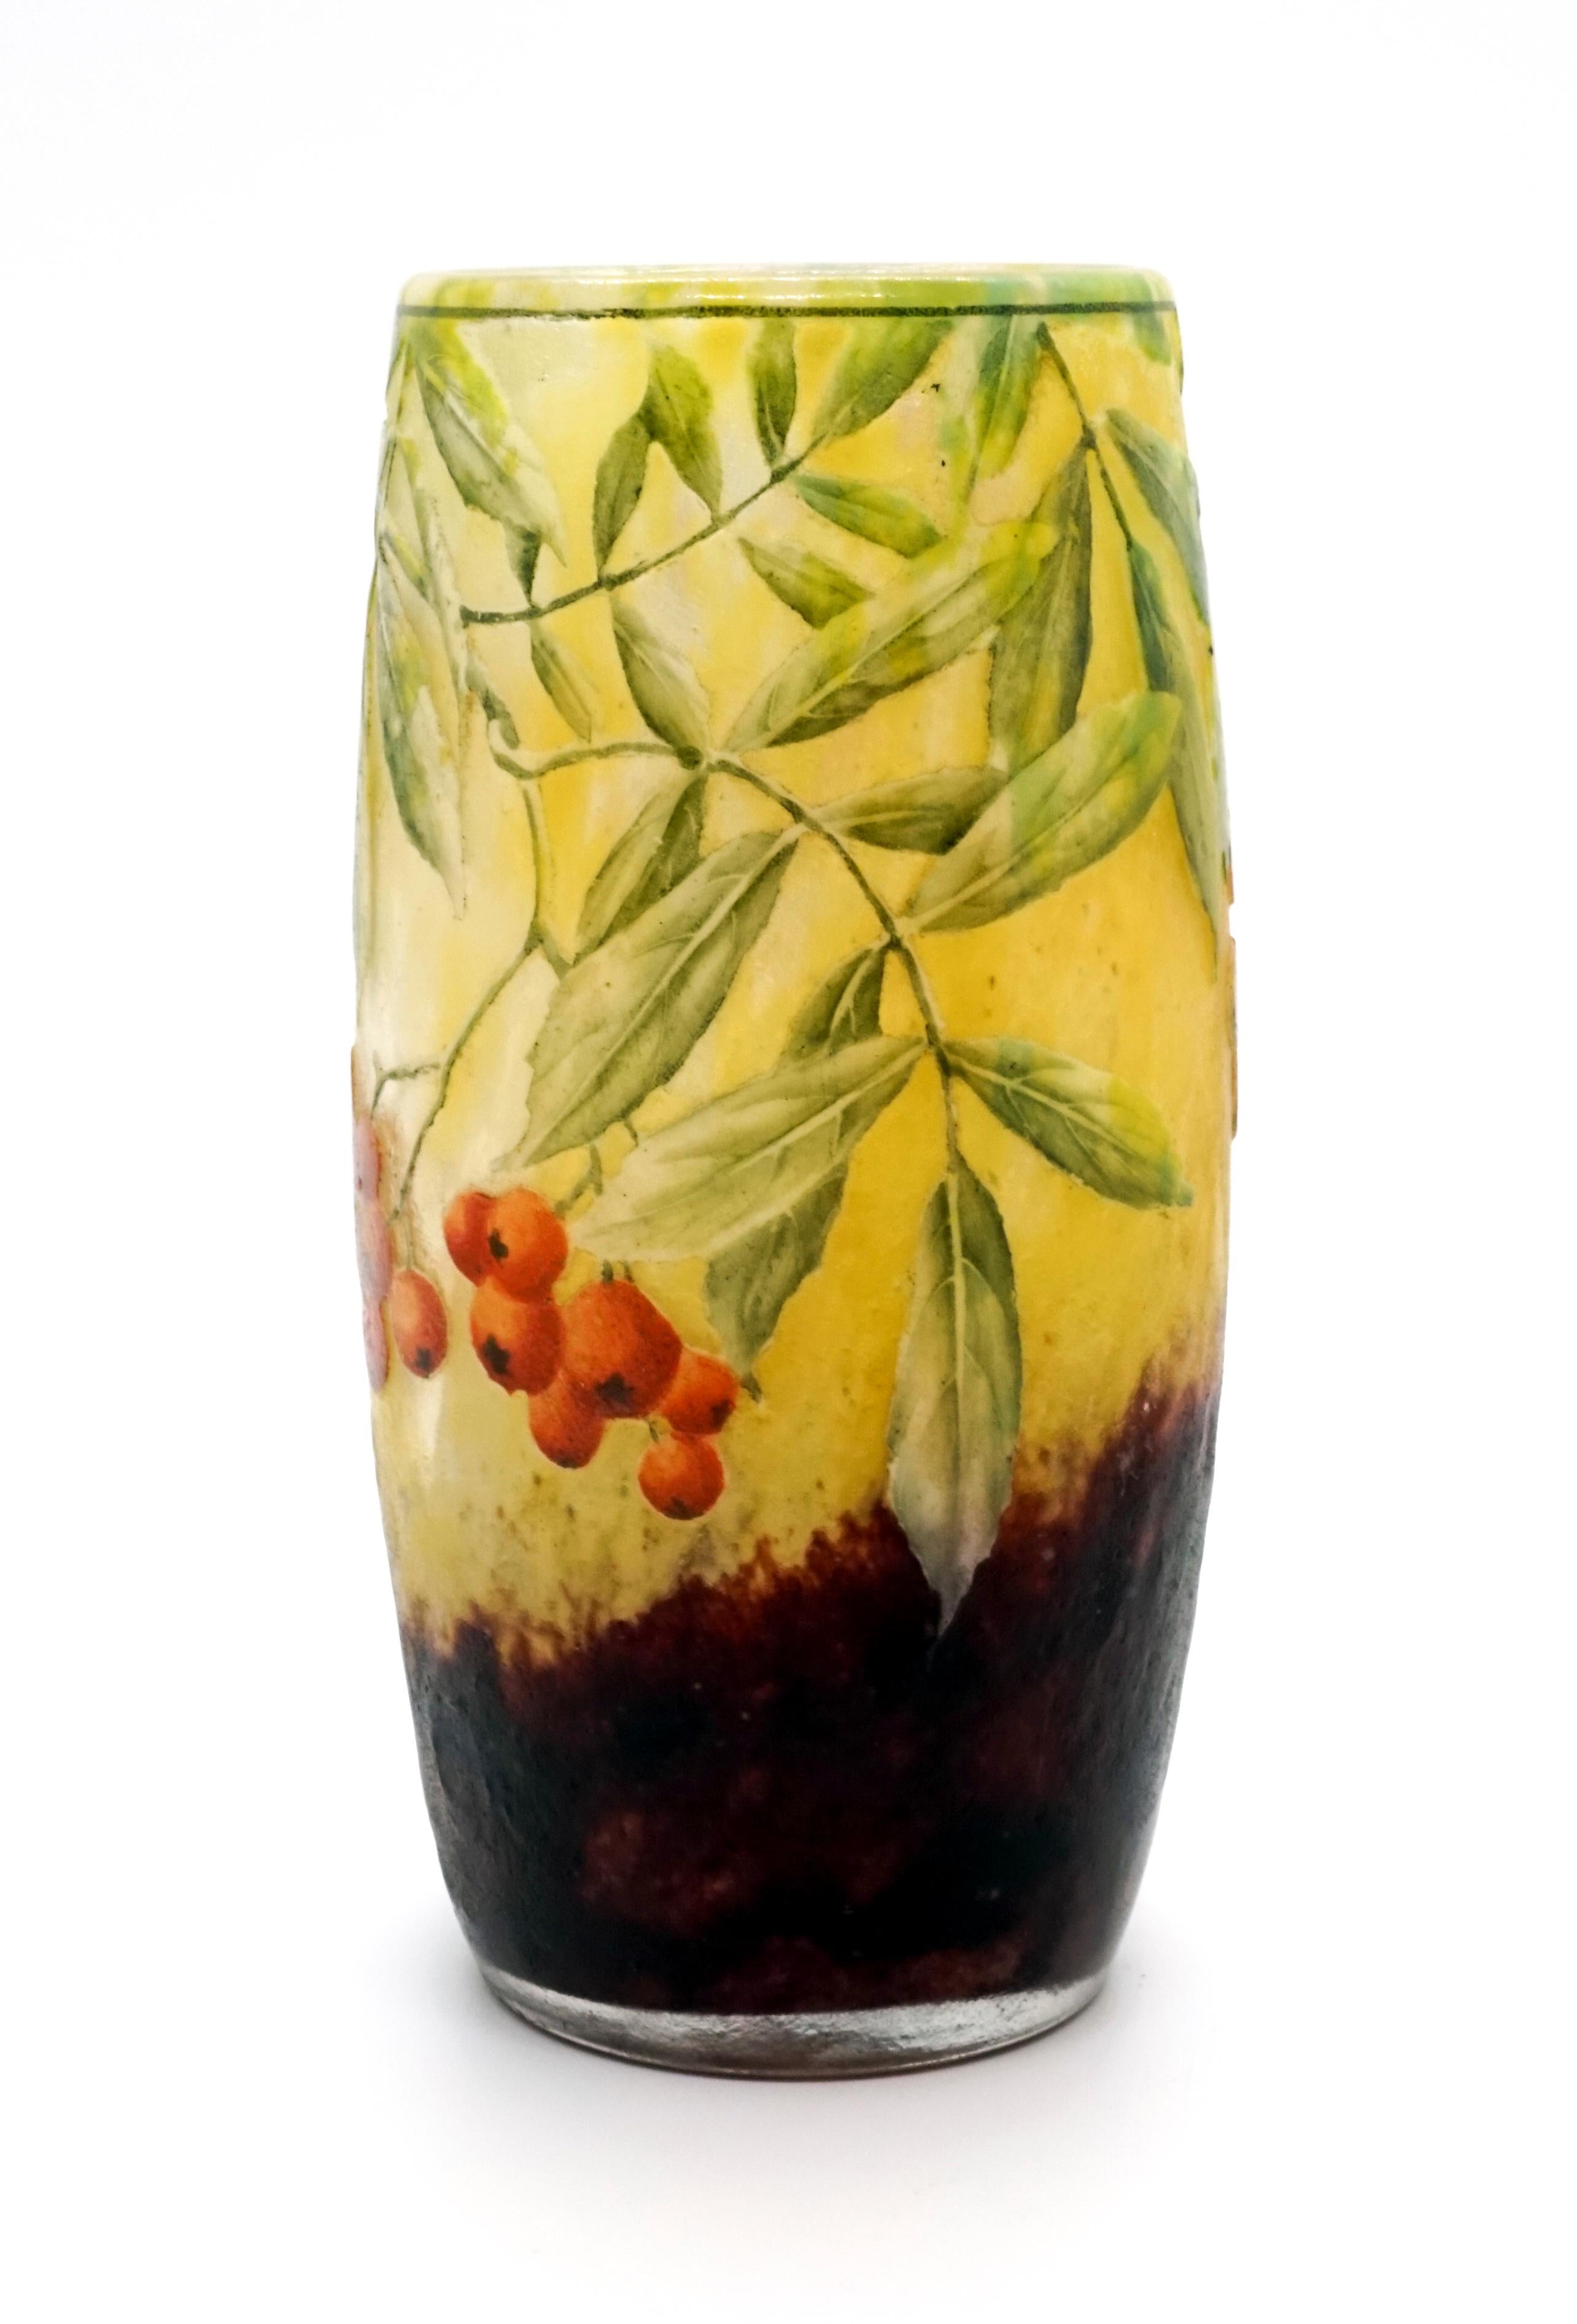 Cylindrical vase, colorless glass with flaky yellow and white, in the stand area with blackberry-colored powder melts, satined, structured surface with etched sea buckthorn decoration painted in polychrome enamel, relief signature 'Daum Nancy' with